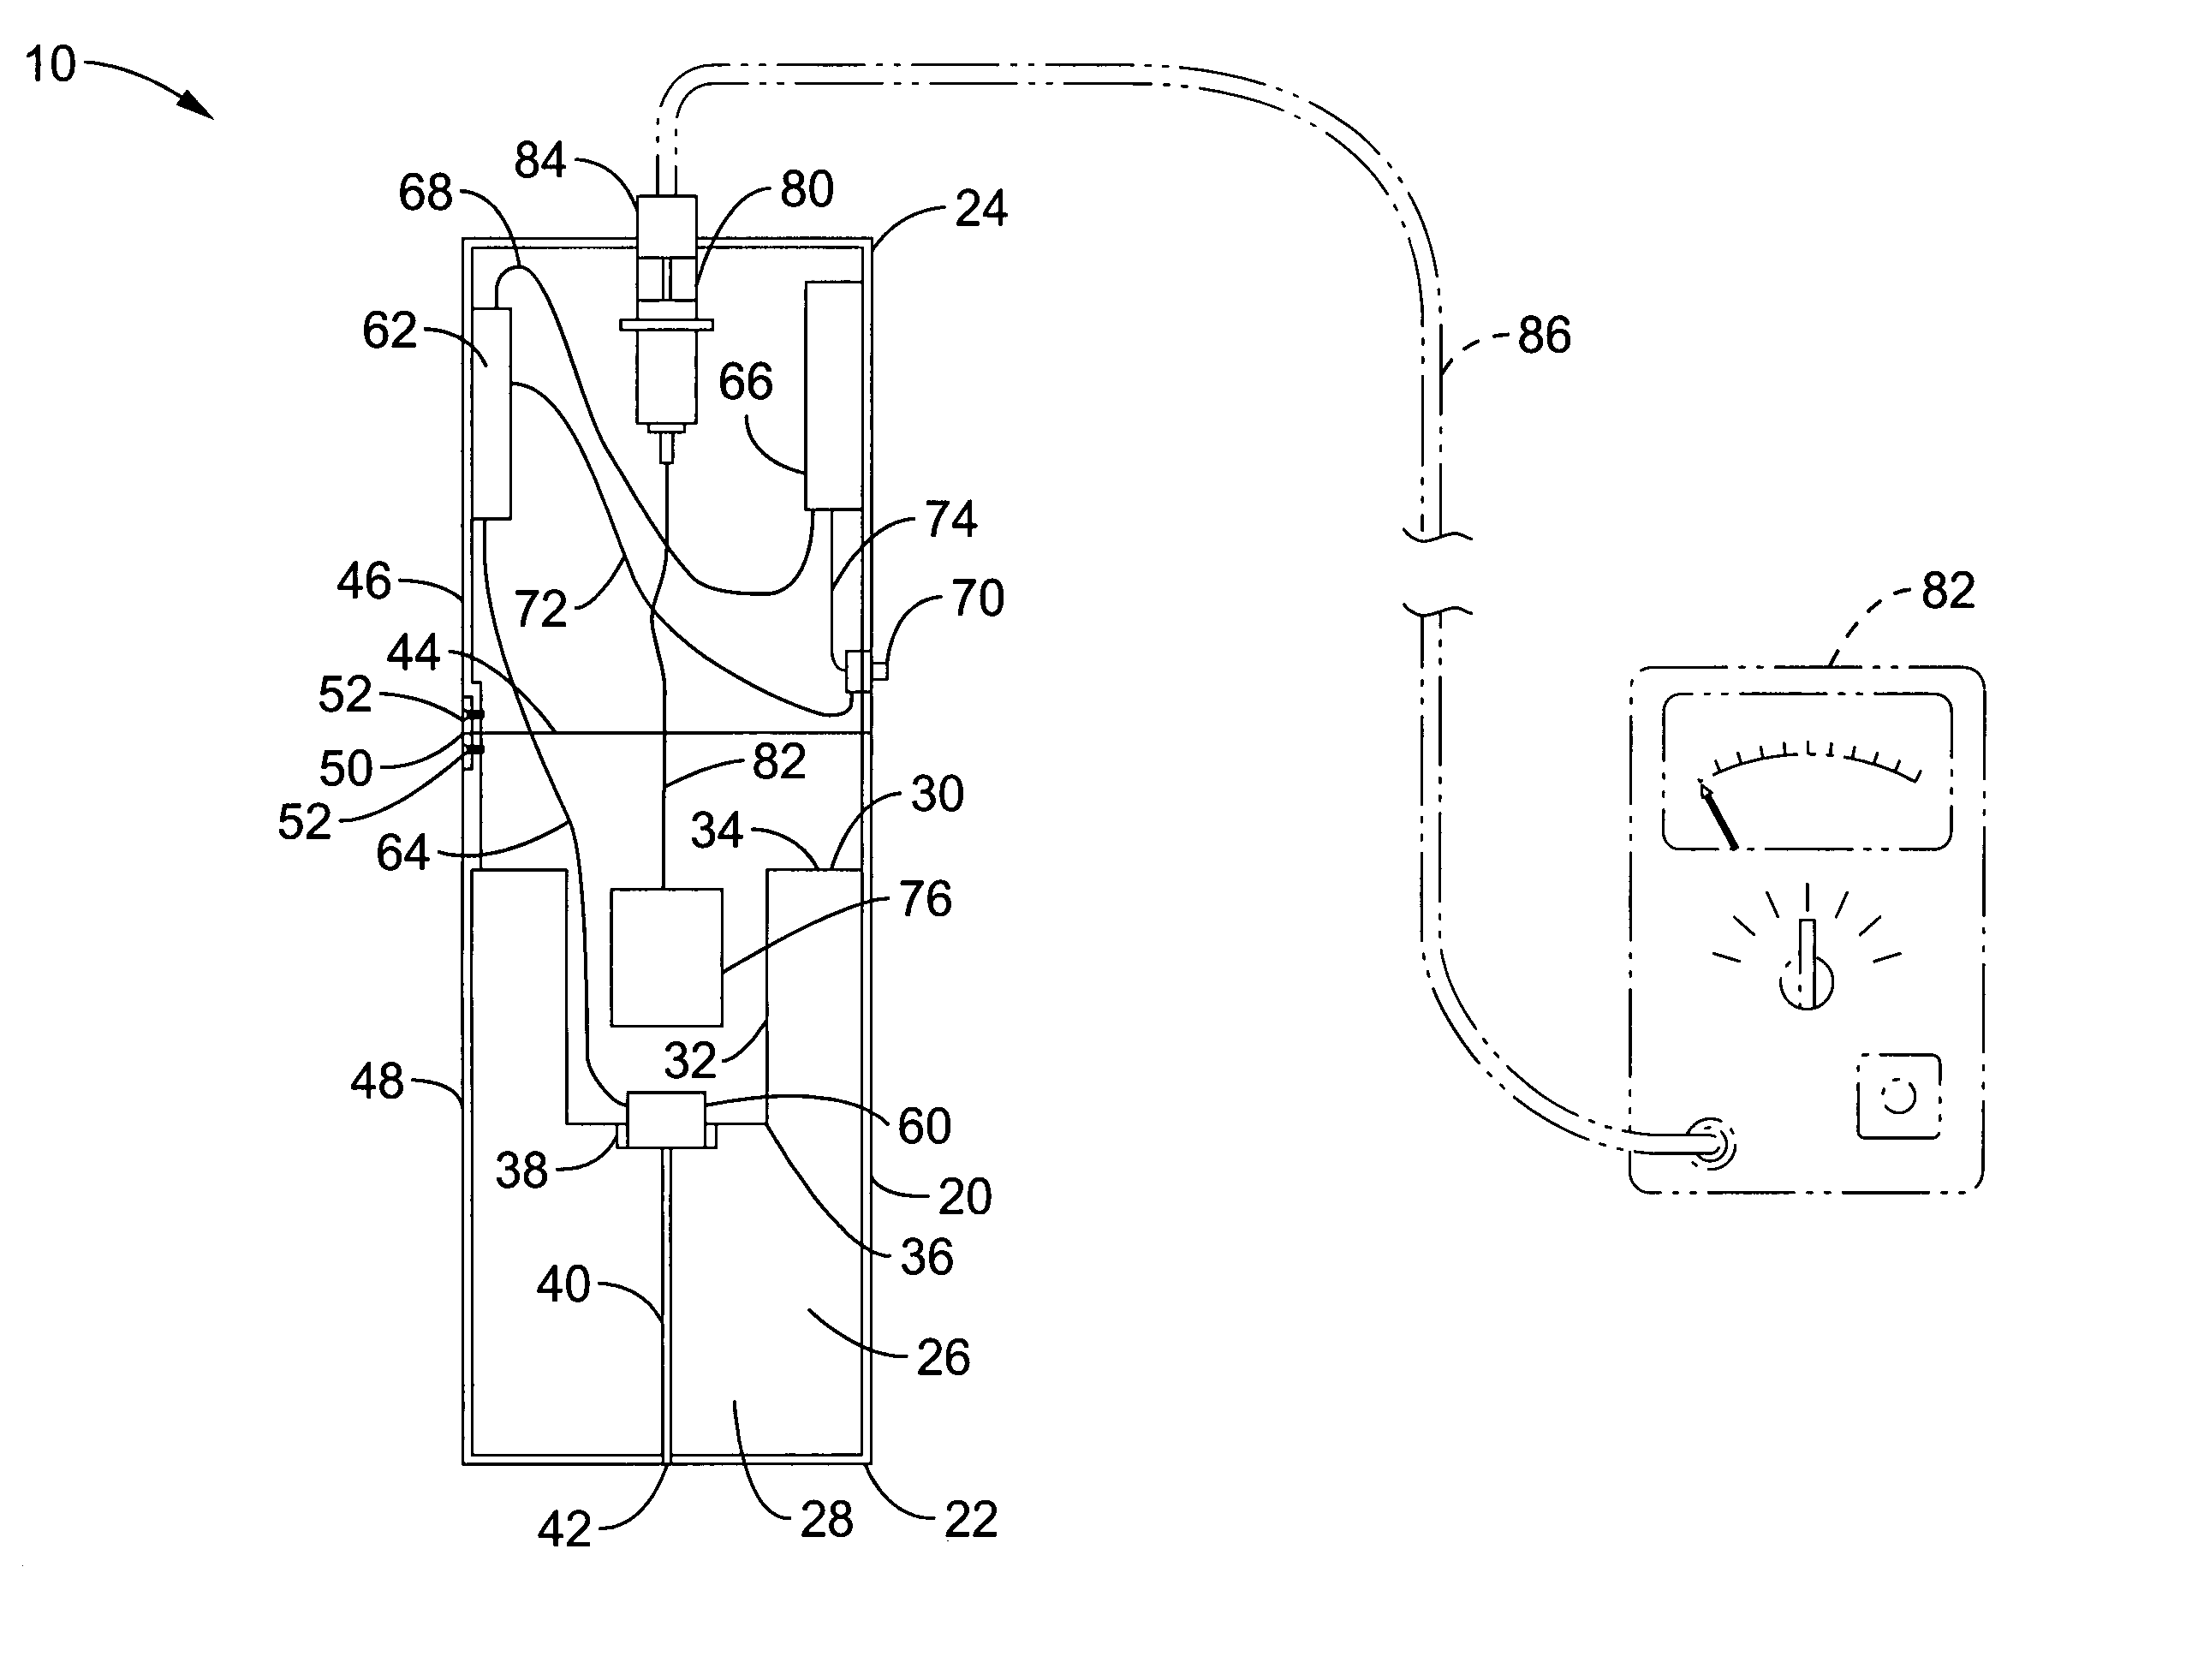 Probe apparatus with laser guiding for locating a source of radioactivity